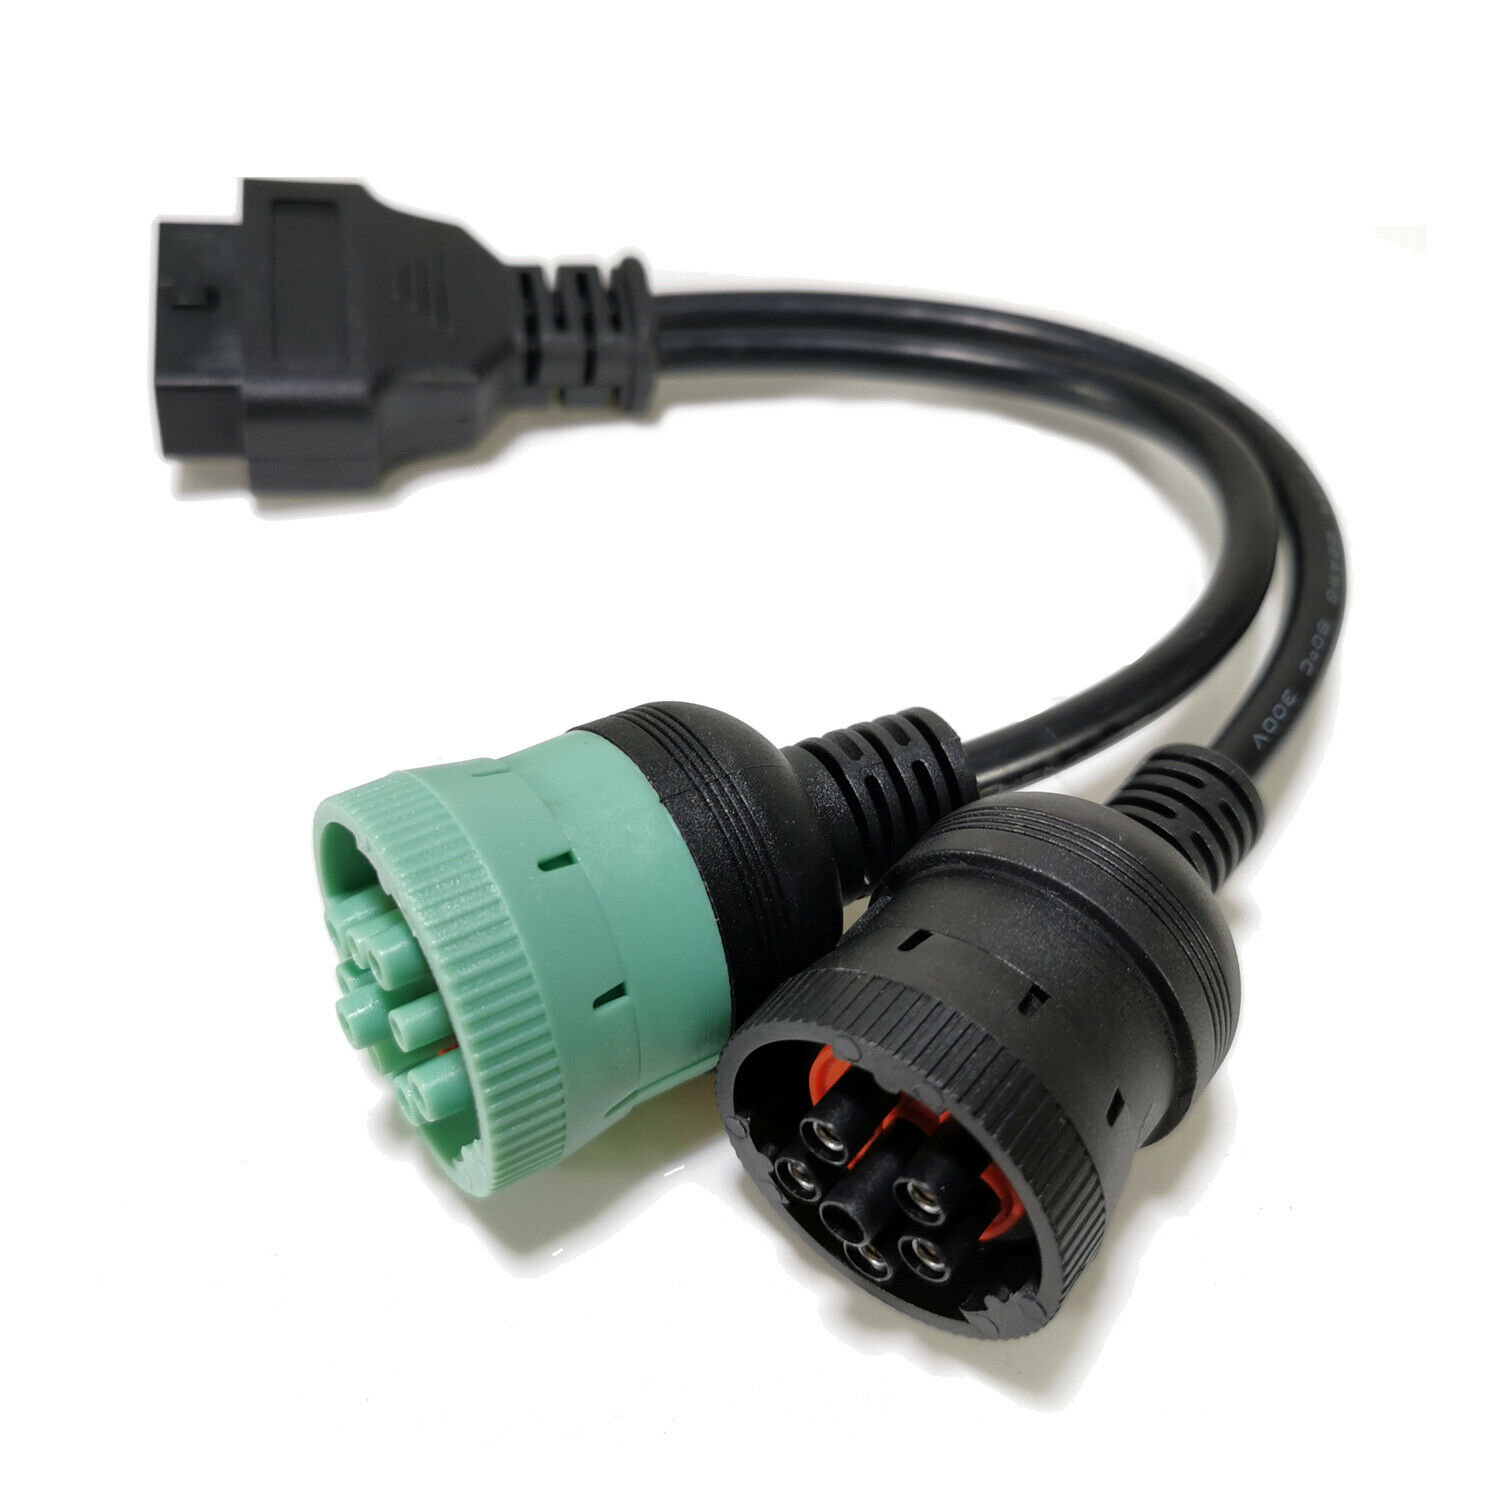 6 Pin J1708 Or 9 Pin J1939 To 16 Pin Obd2 Obdii Adapter Cable Heavy Duty Truck